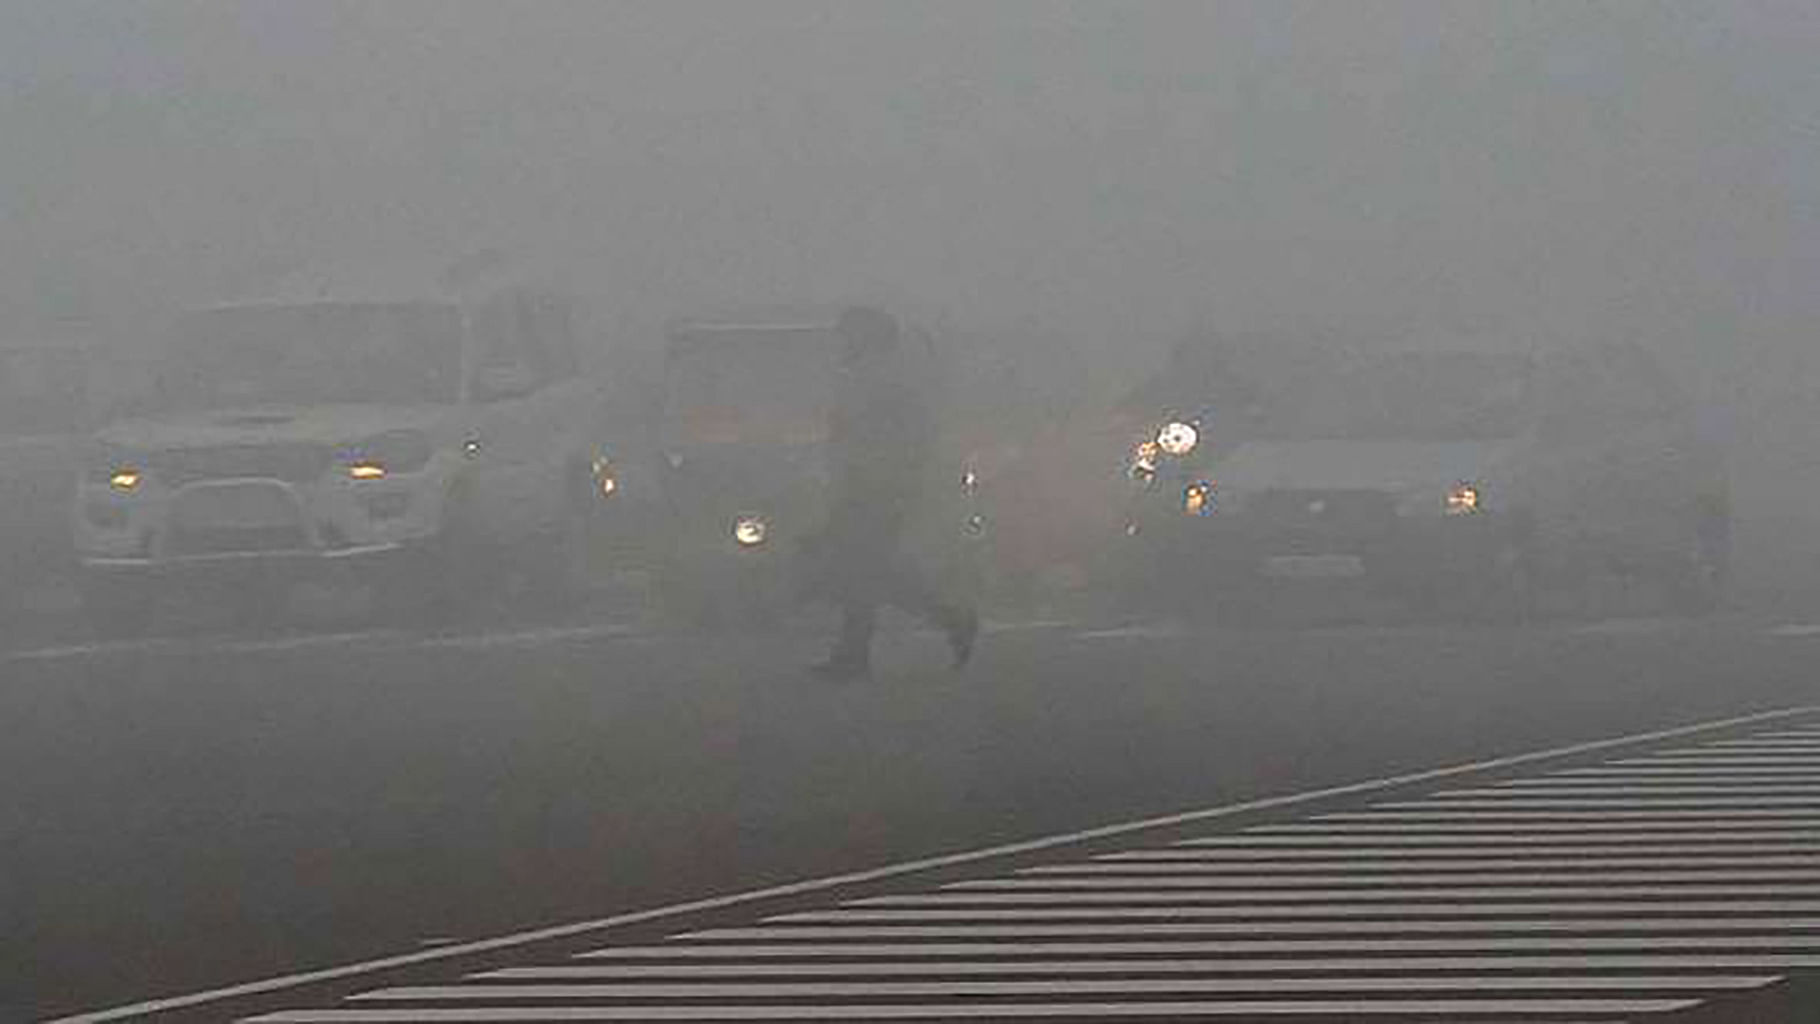 Fog persists in the national capital region as the minimum temperature dropped to 4.2 degree Celsius.